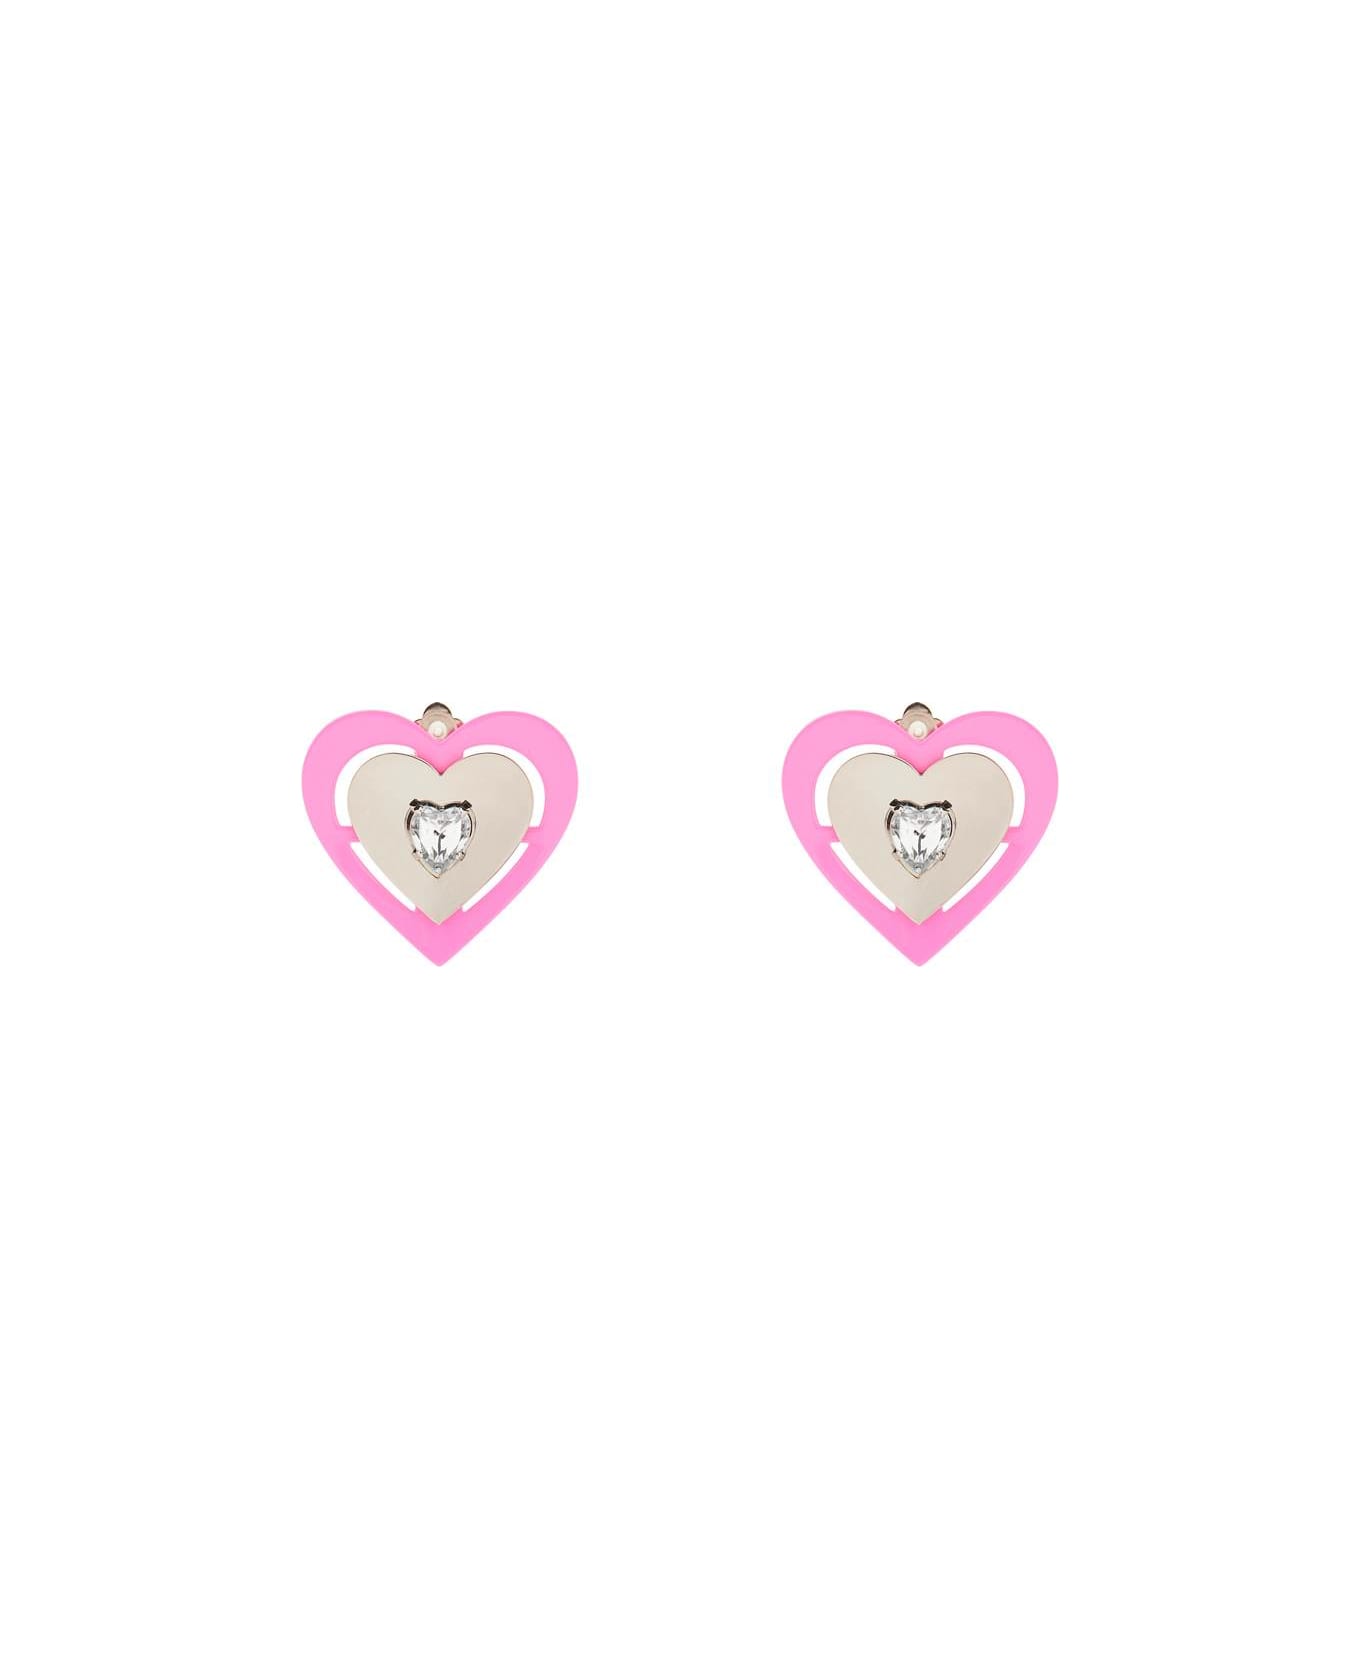 SafSafu 'pink Neon Heart' Clip-on Earrings - SILVER/PINK イヤリング